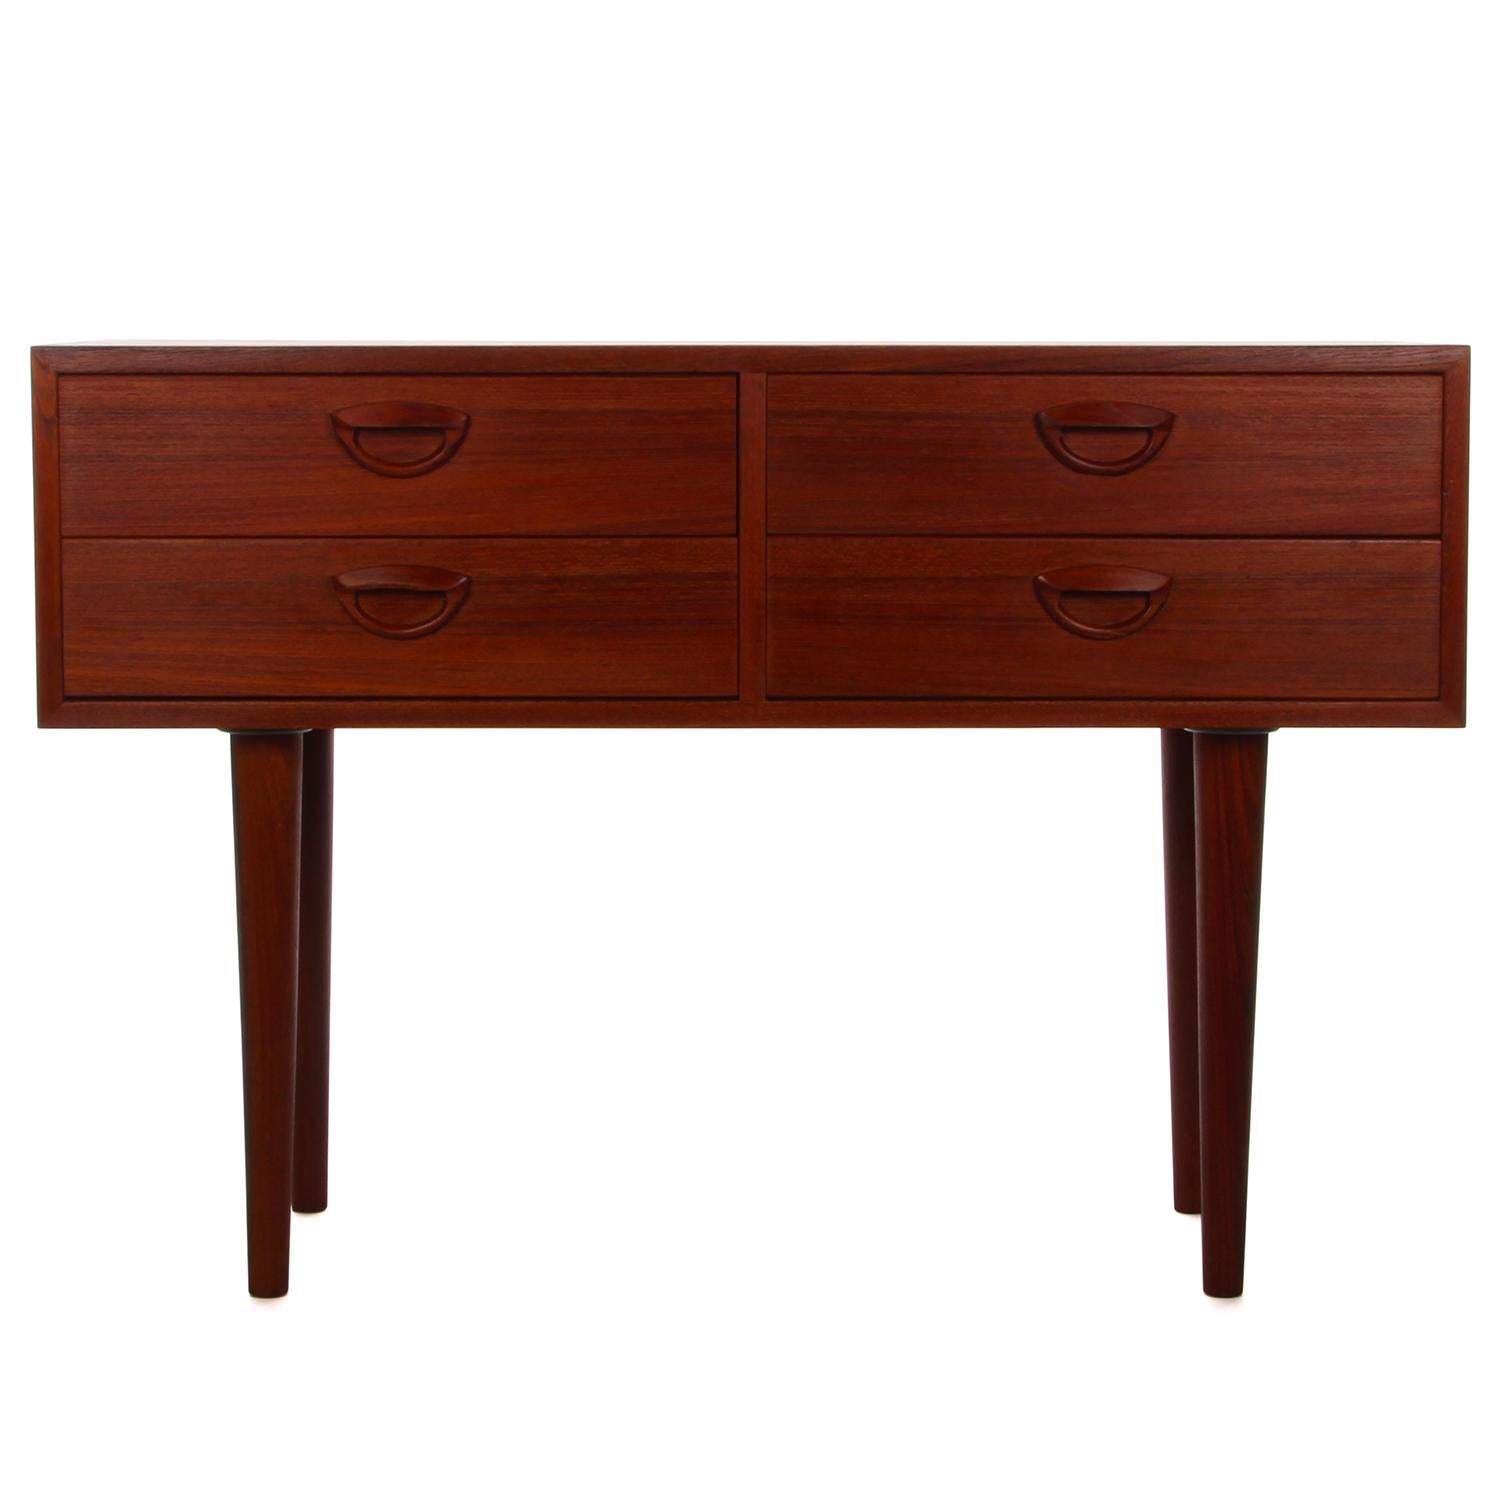 Teak entry table by Kai Kristiansen for FM Furniture, circa 1957 - super beautiful and very stylish entryway table with four drawers in very good vintage condition.

A classic midcentury piece crafted in teak with a rectangular shaped body carried